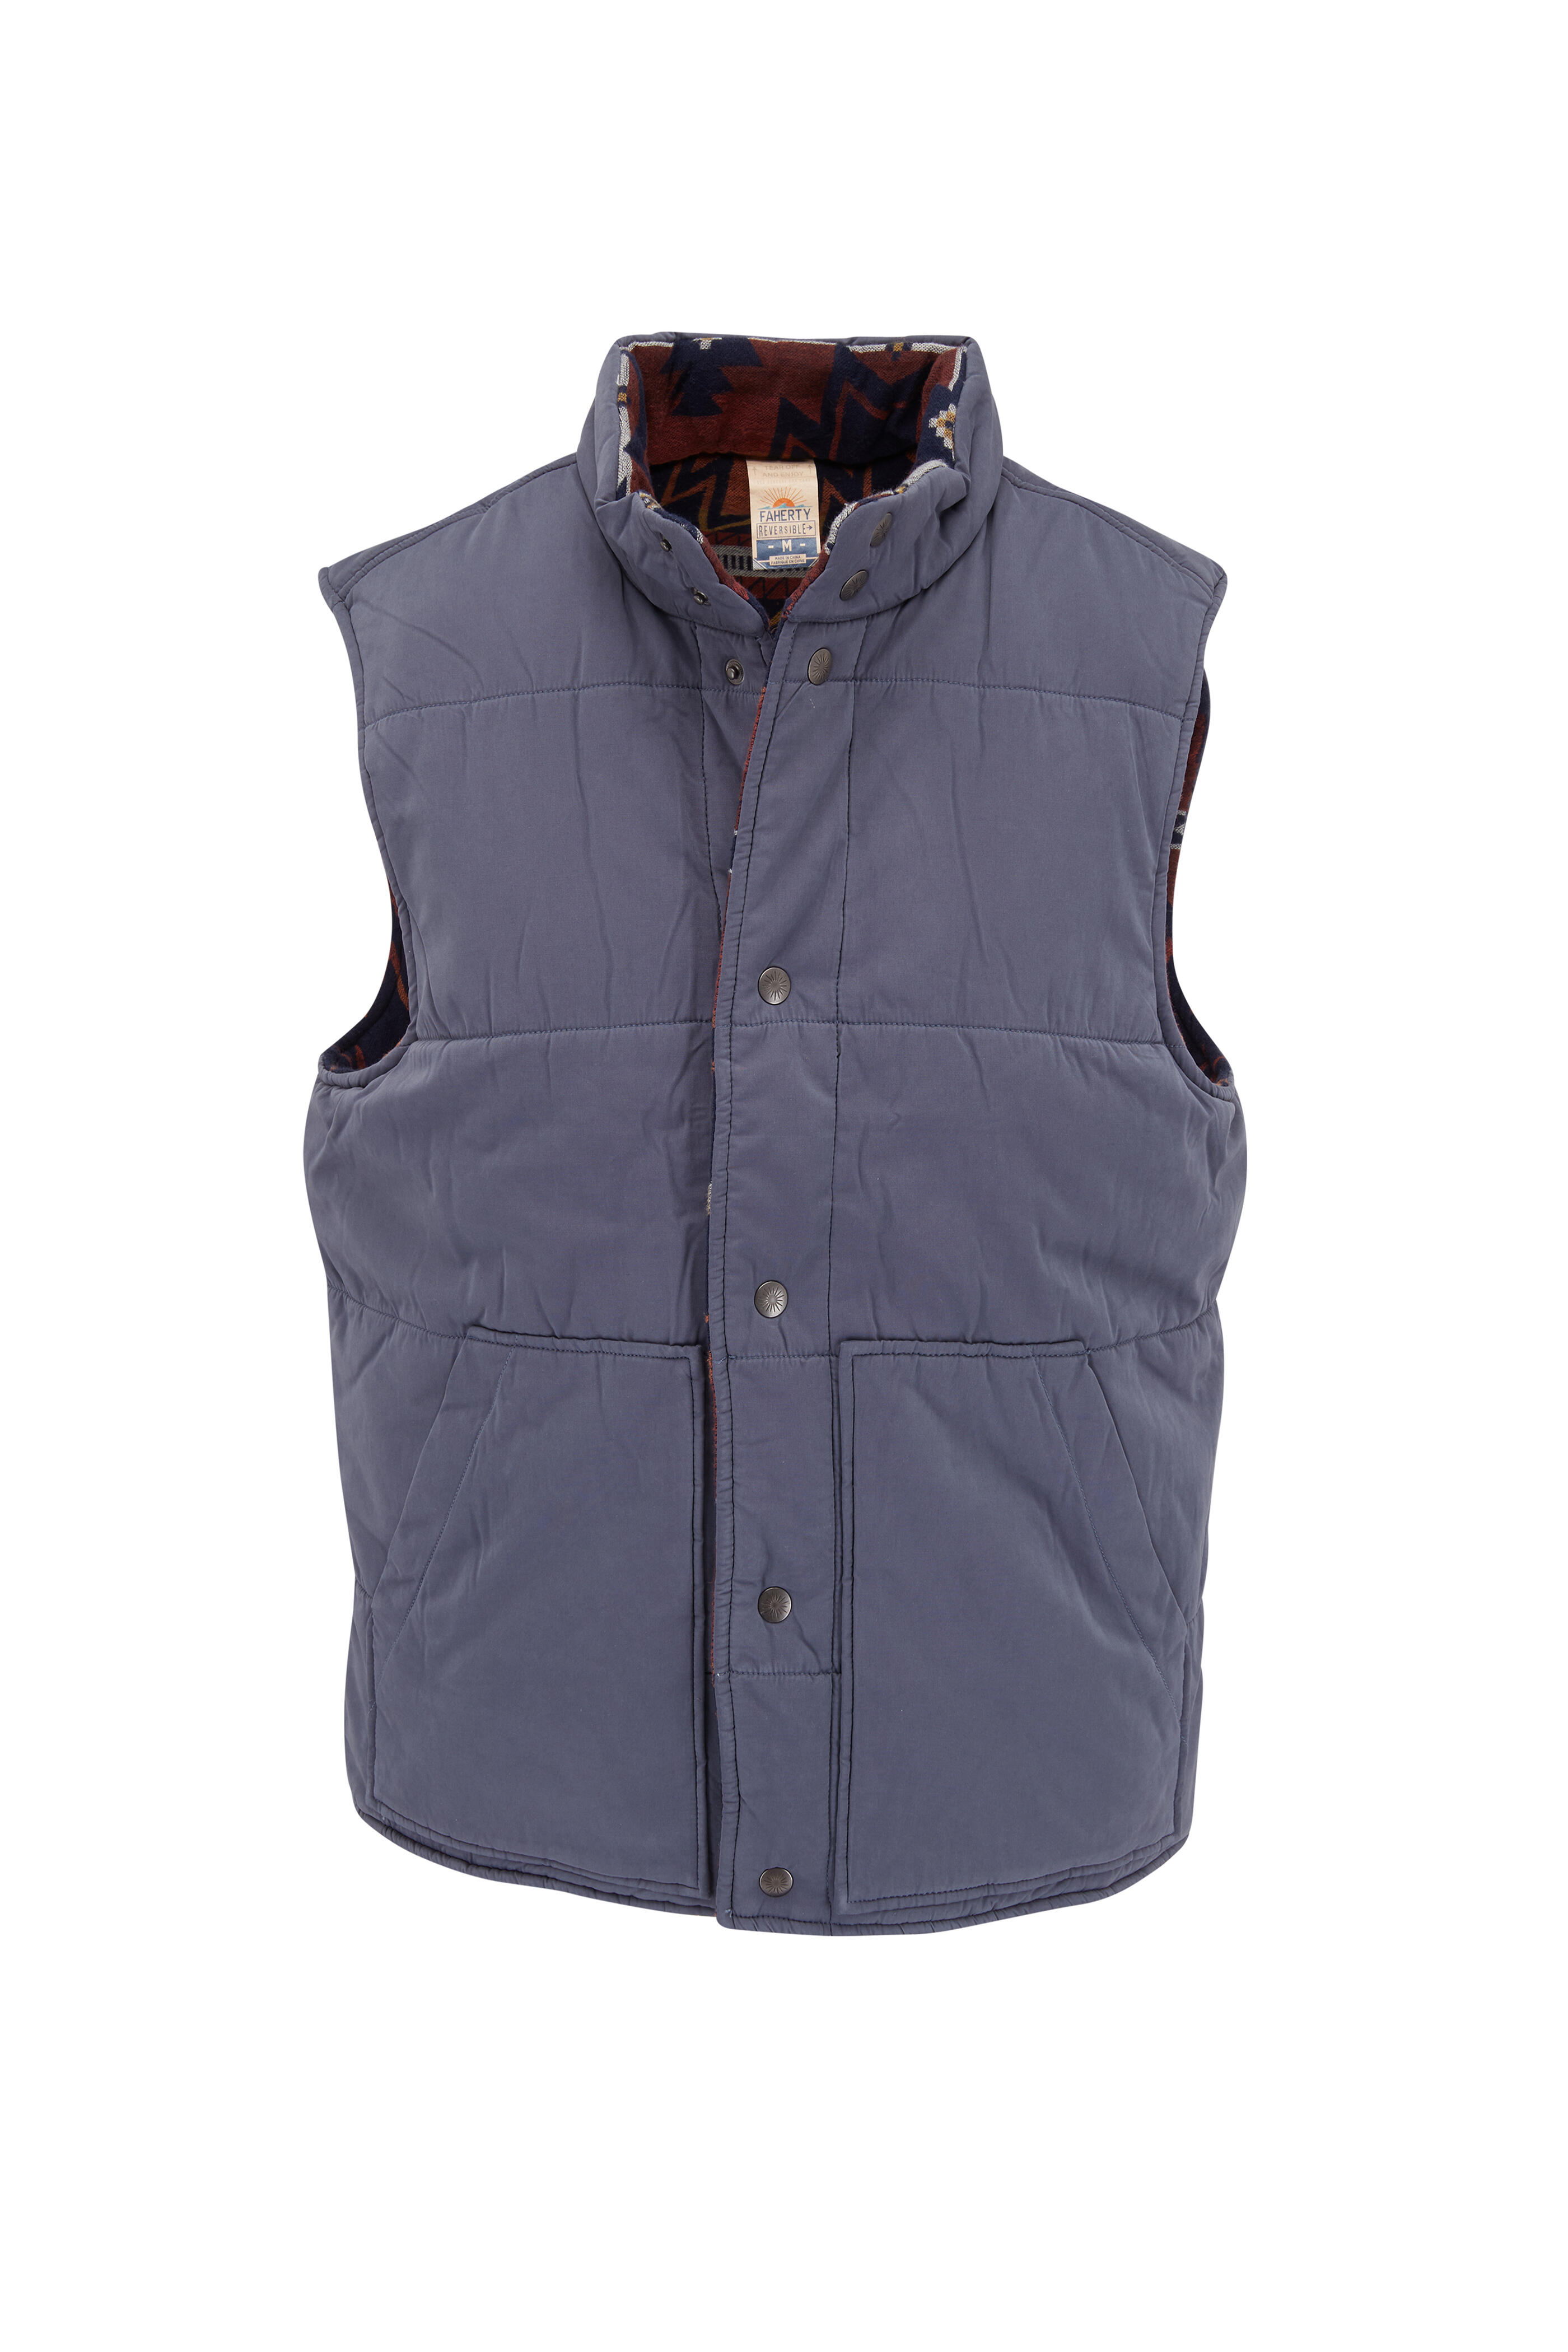 Faherty Brand - Doug Good Feather & Blue Reversible Puffer Vest